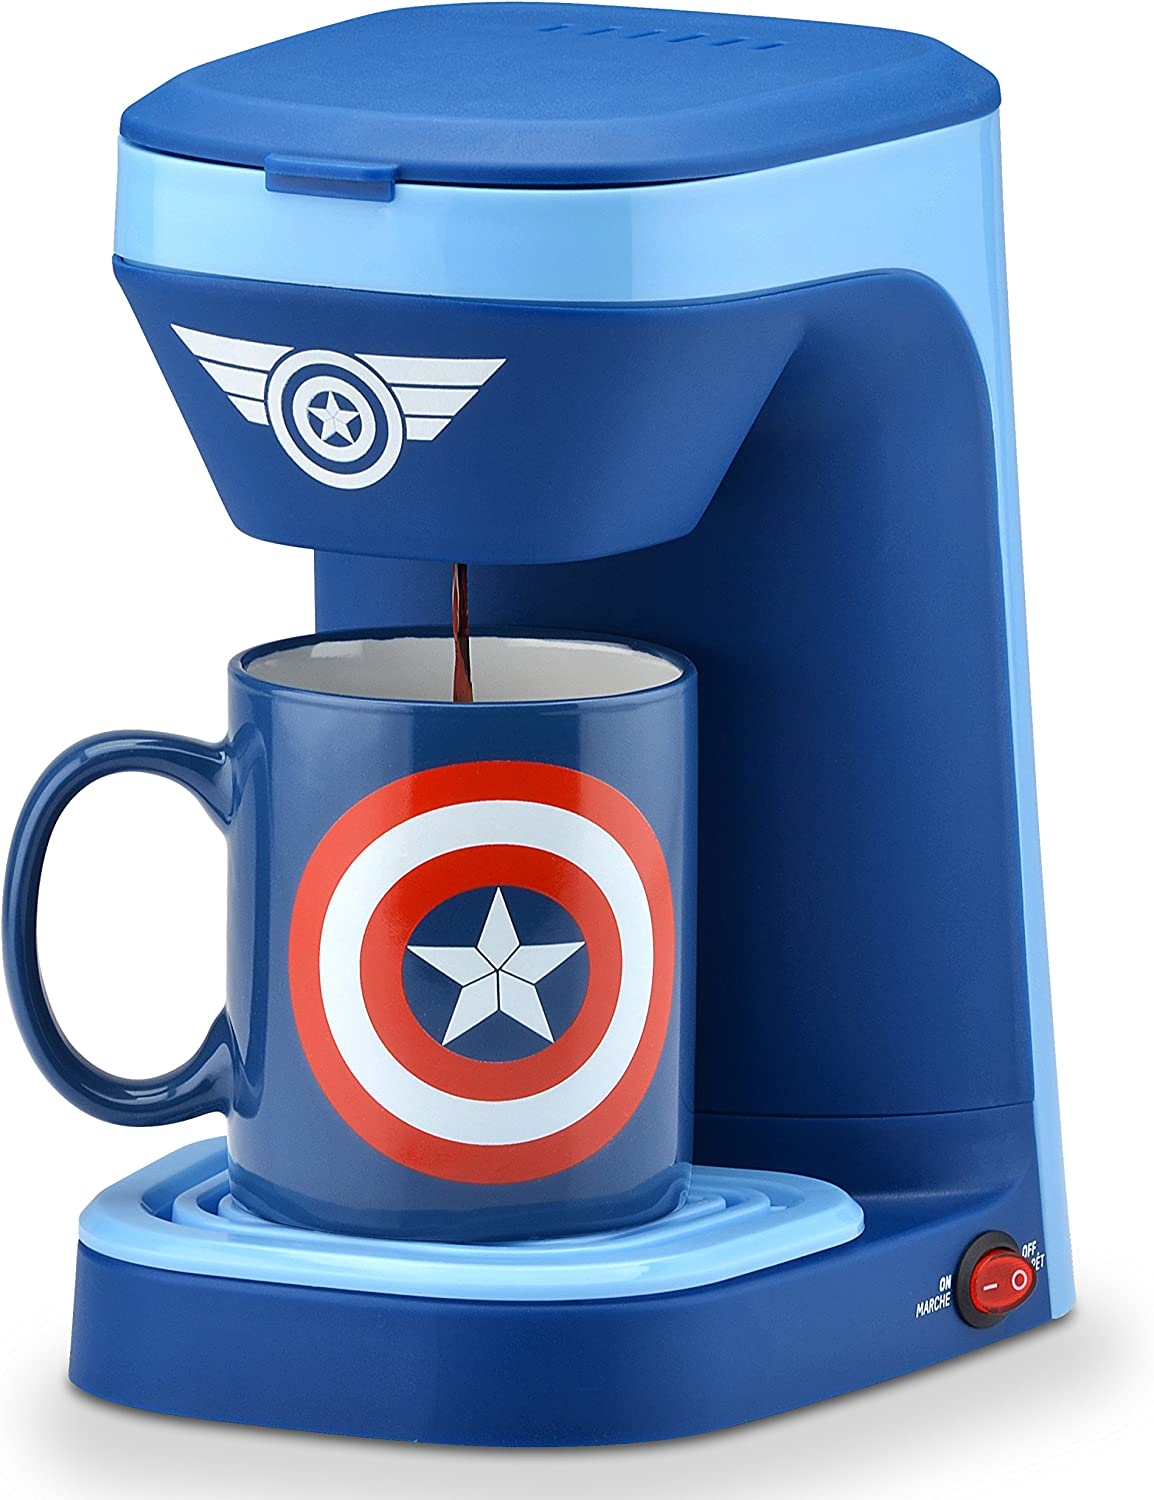 Marvel Captain America 1-Cup Coffee Maker Import To Shop ×Product customization General Description Gallery Reviews Variations